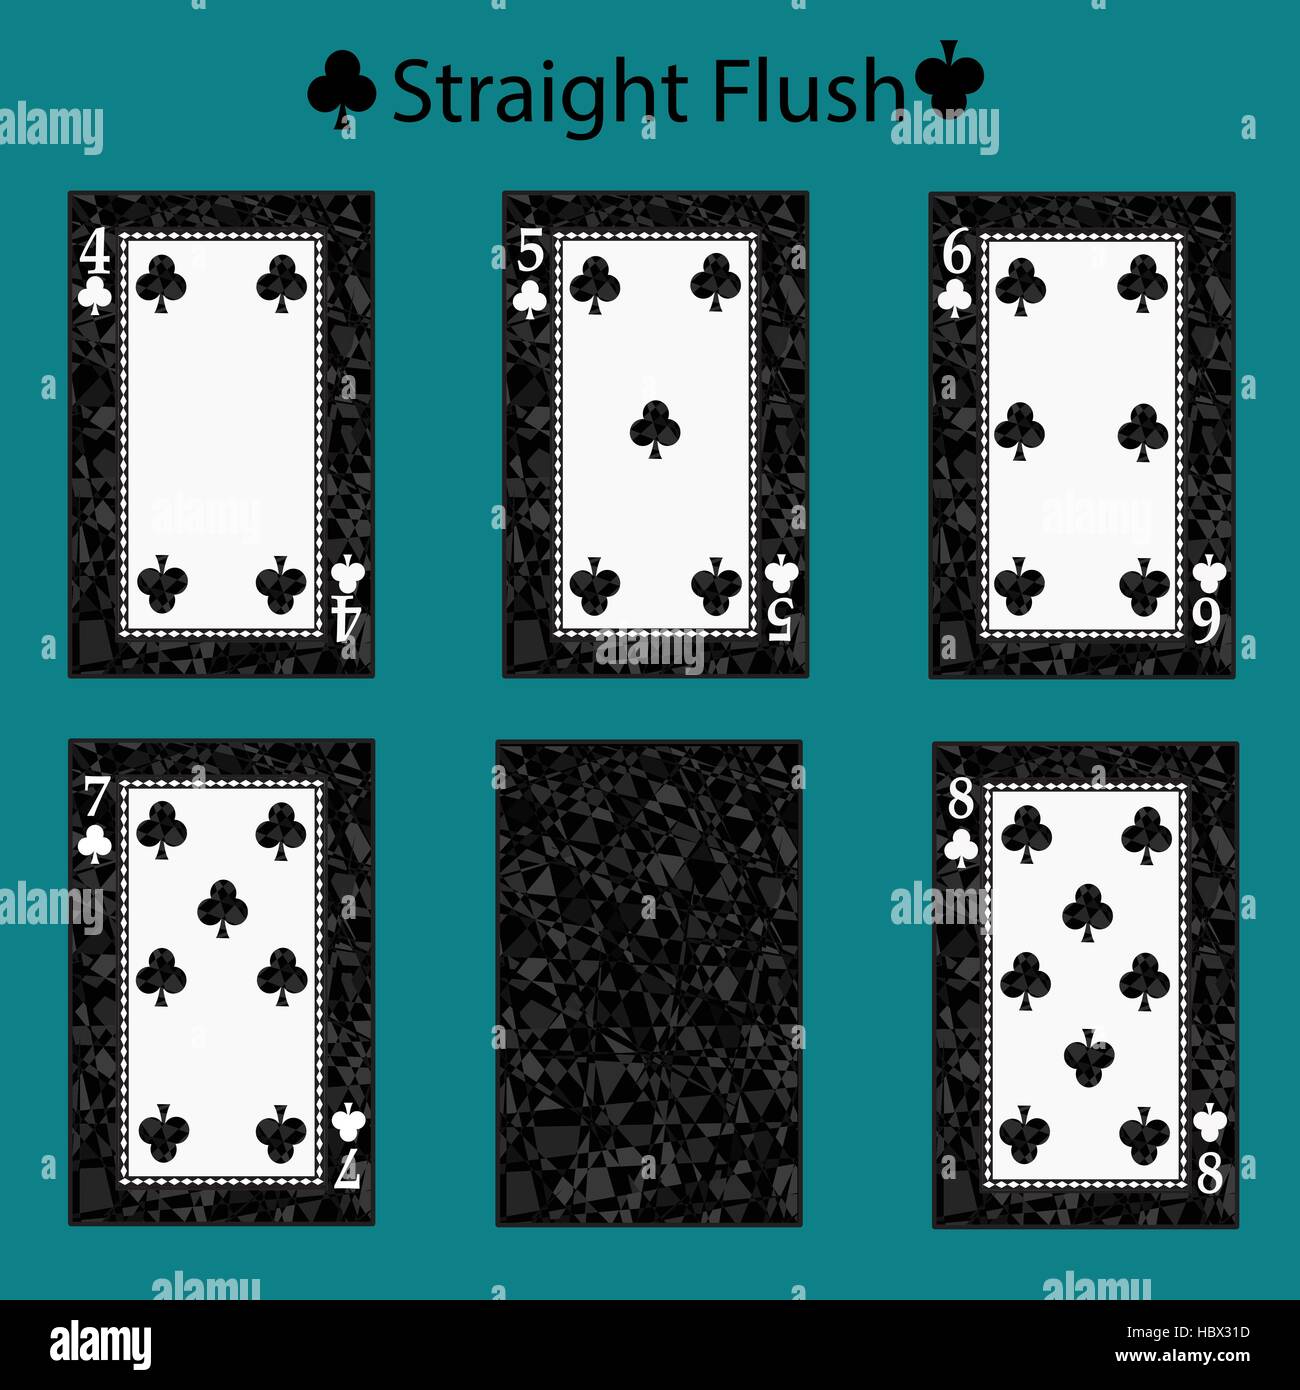 straight flush playing card poker combination. vector illustration eps 10. On a green background. To use for design, registration, the websites, dress Stock Vector